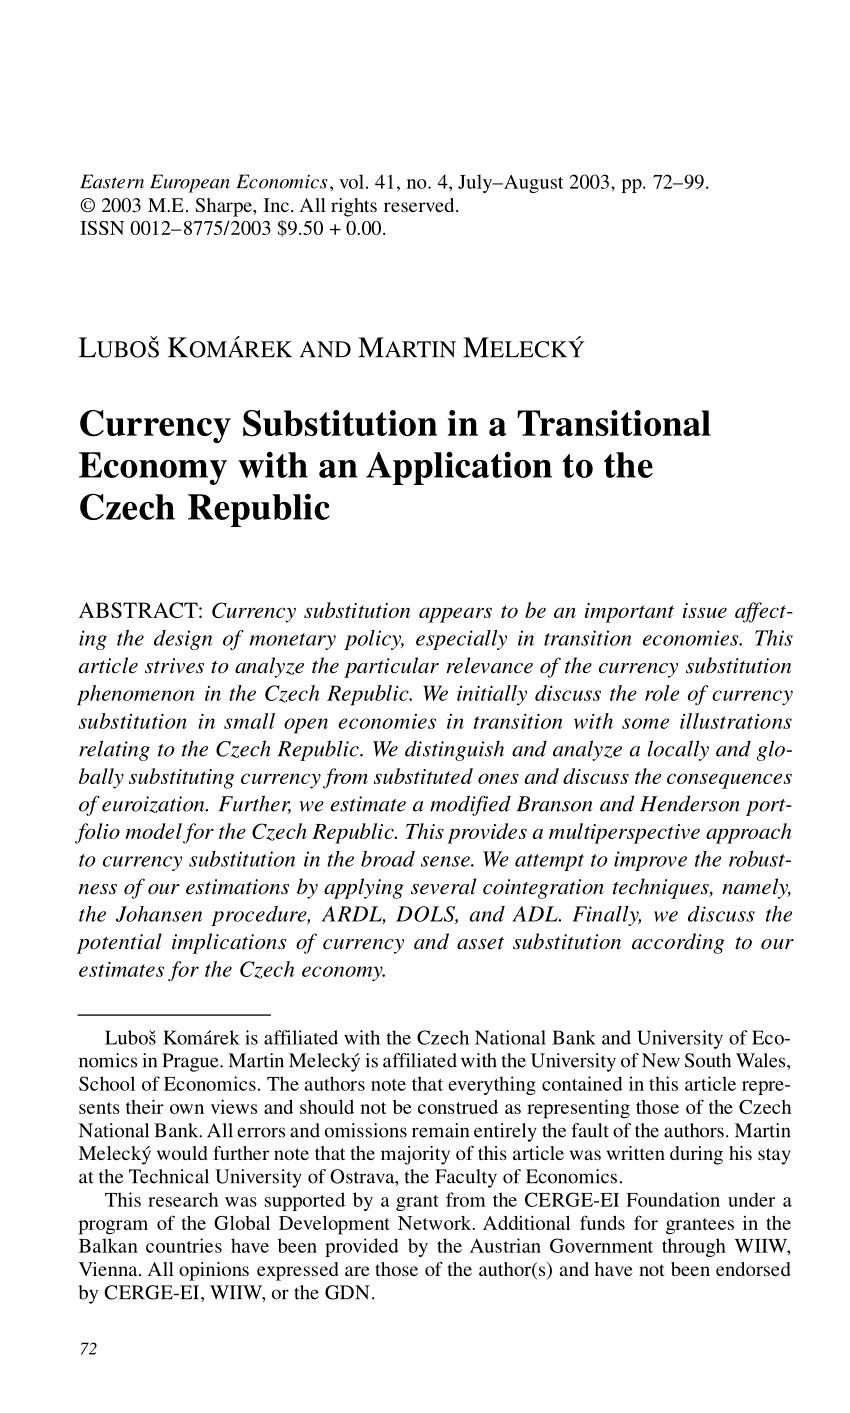 Pdf Currency Substitution In A Transitional Economy With An Application To The Czech Republic